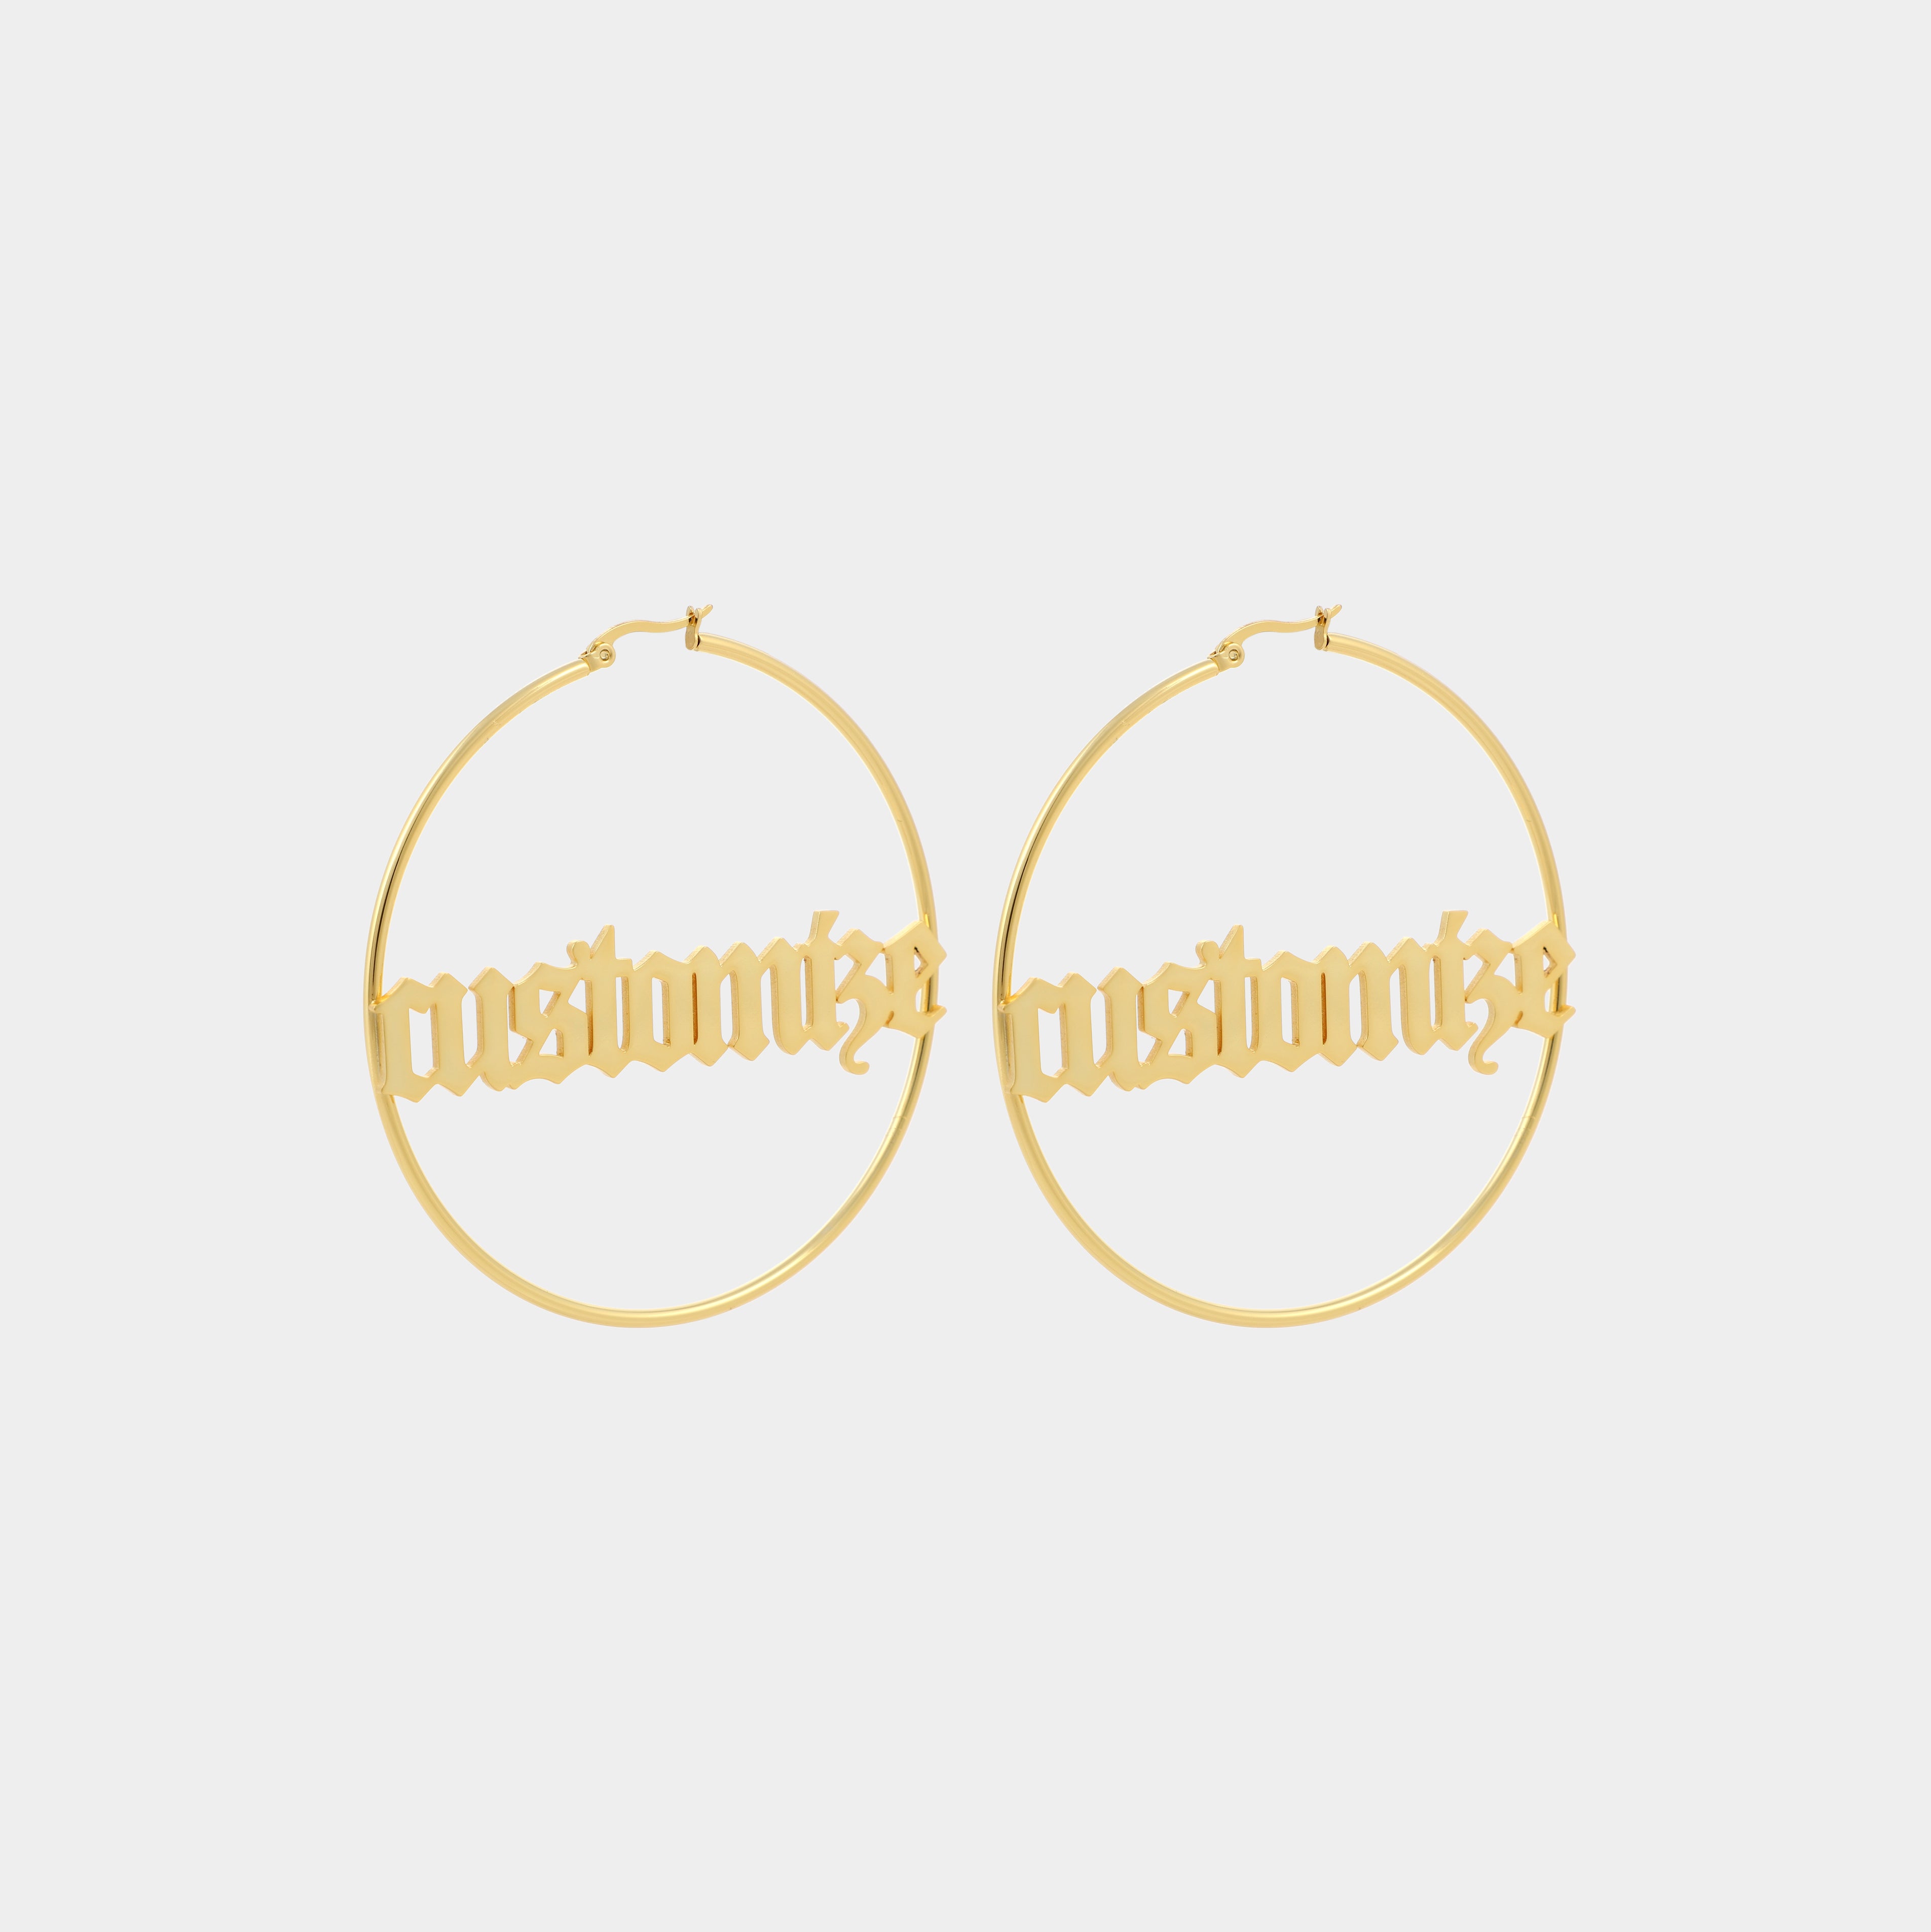 PERSONALIZED HOOP EARRING - Old English